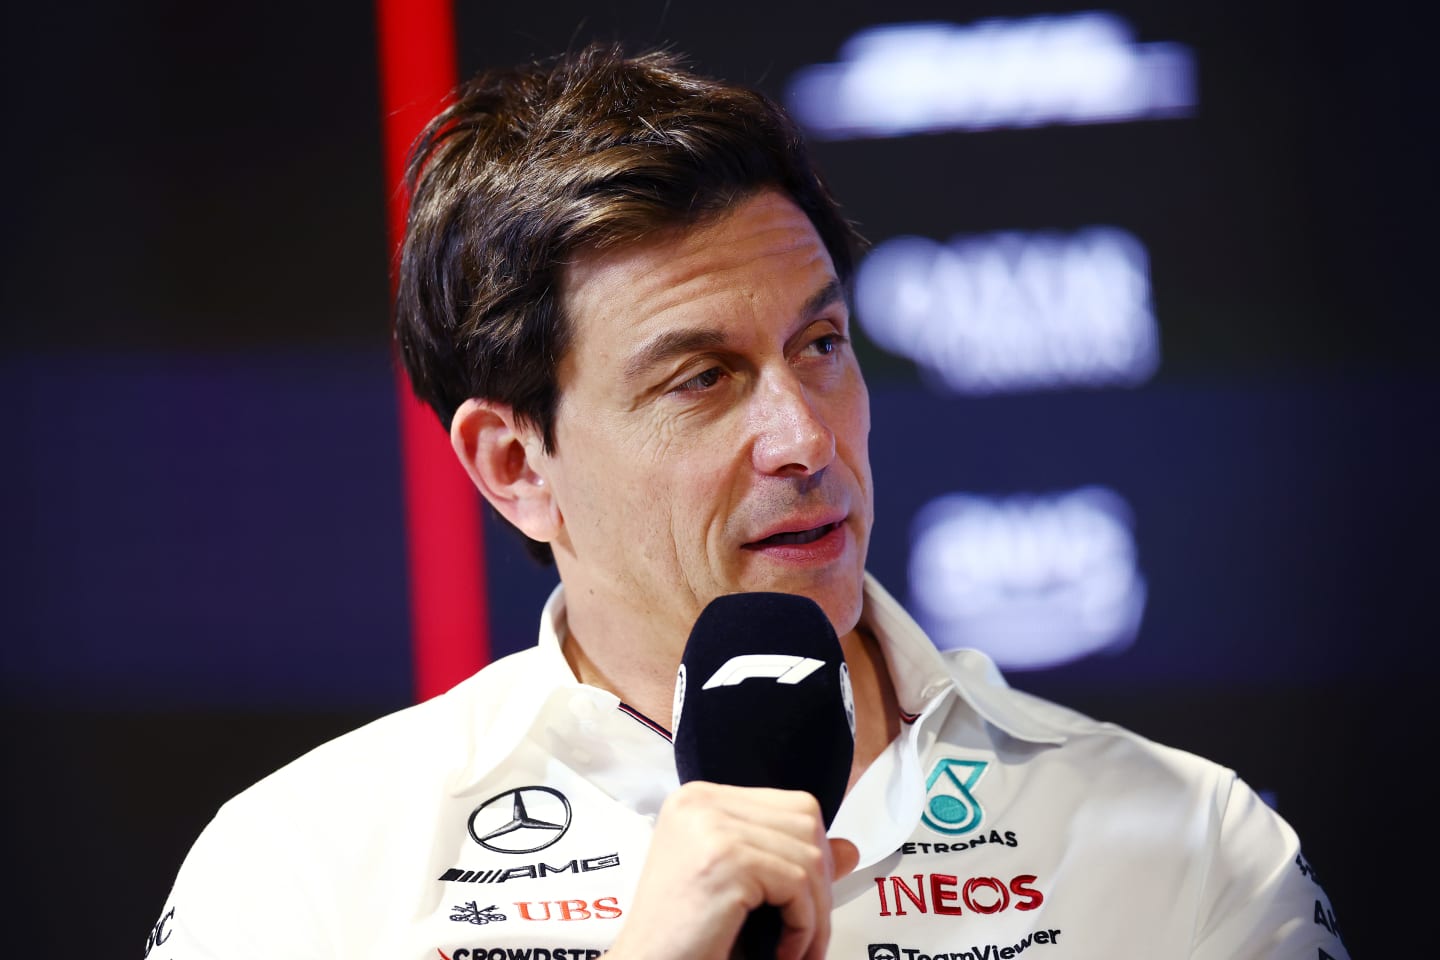 JEDDAH, SAUDI ARABIA - MARCH 17: Mercedes GP Executive Director Toto Wolff attends the Team